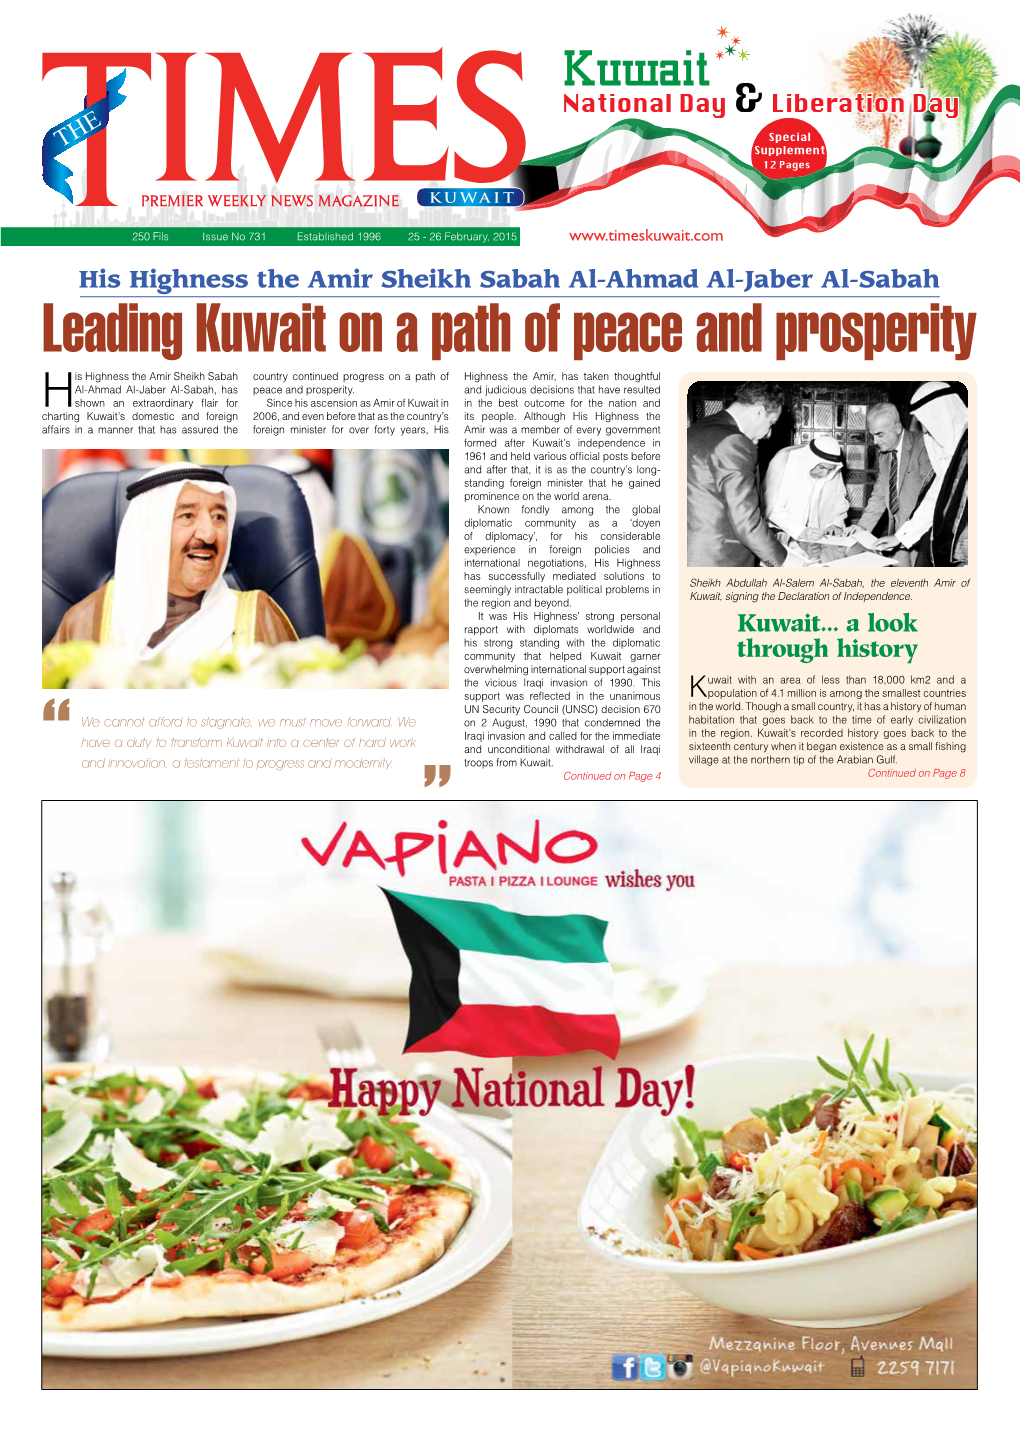 Leading Kuwait on a Path of Peace and Prosperity